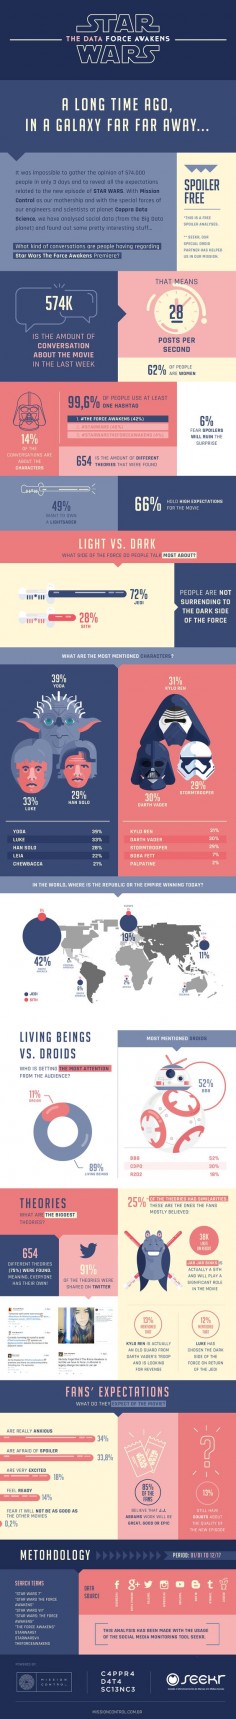 Star Wars: The Force Awakens | Infographic on Behance